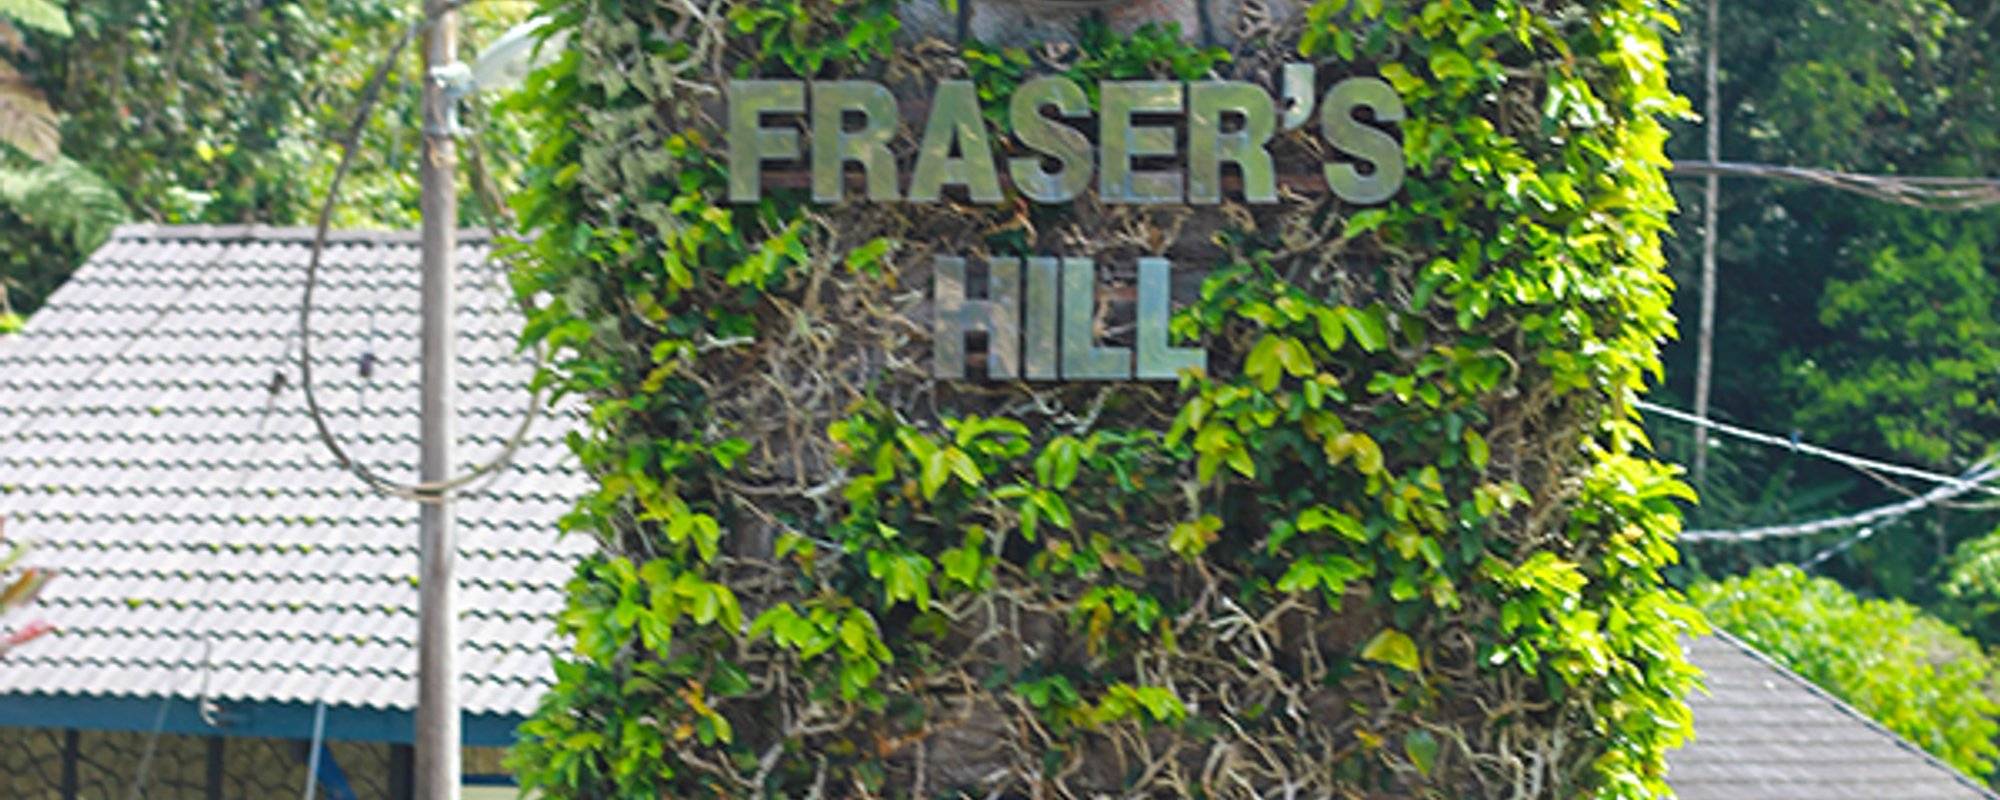 A Short Stop for Paddock and Archery, Fraser's Hill, Pahang - Part 1